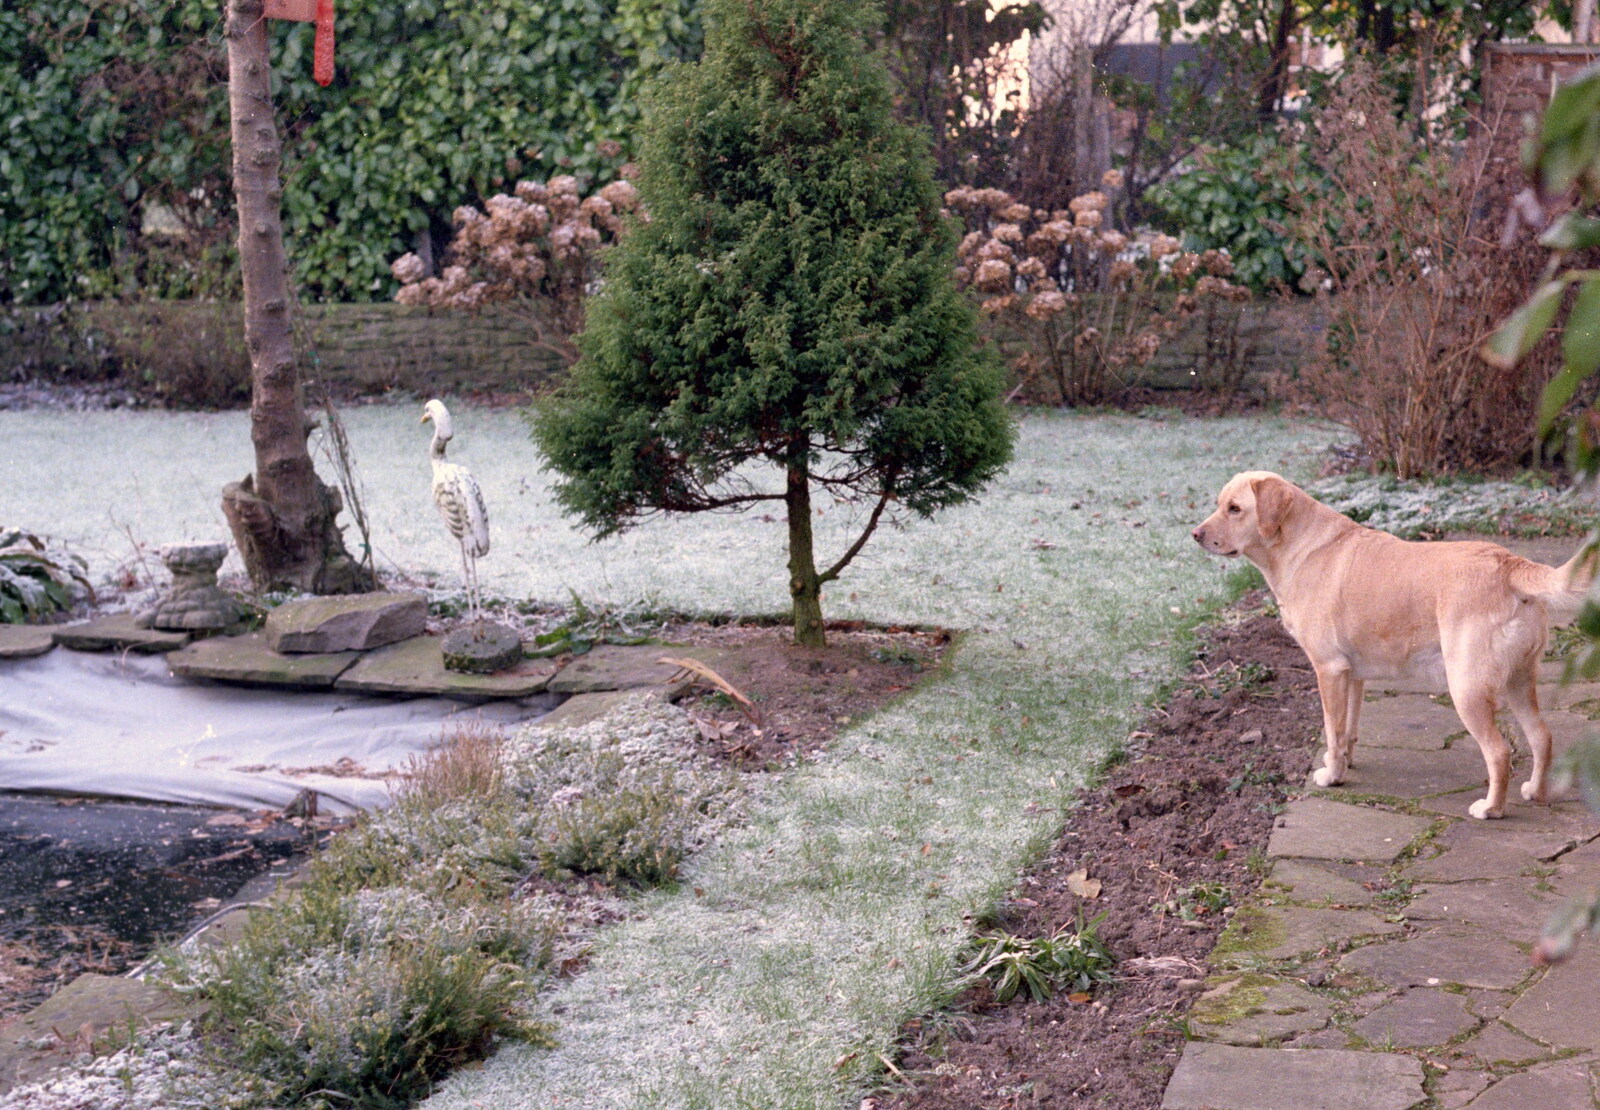 Brandy in the garden at Ryles Park Avenue from Christmas in Macclesfield and Wetherby, Cheshire  and Yorkshire - 25th December 1985